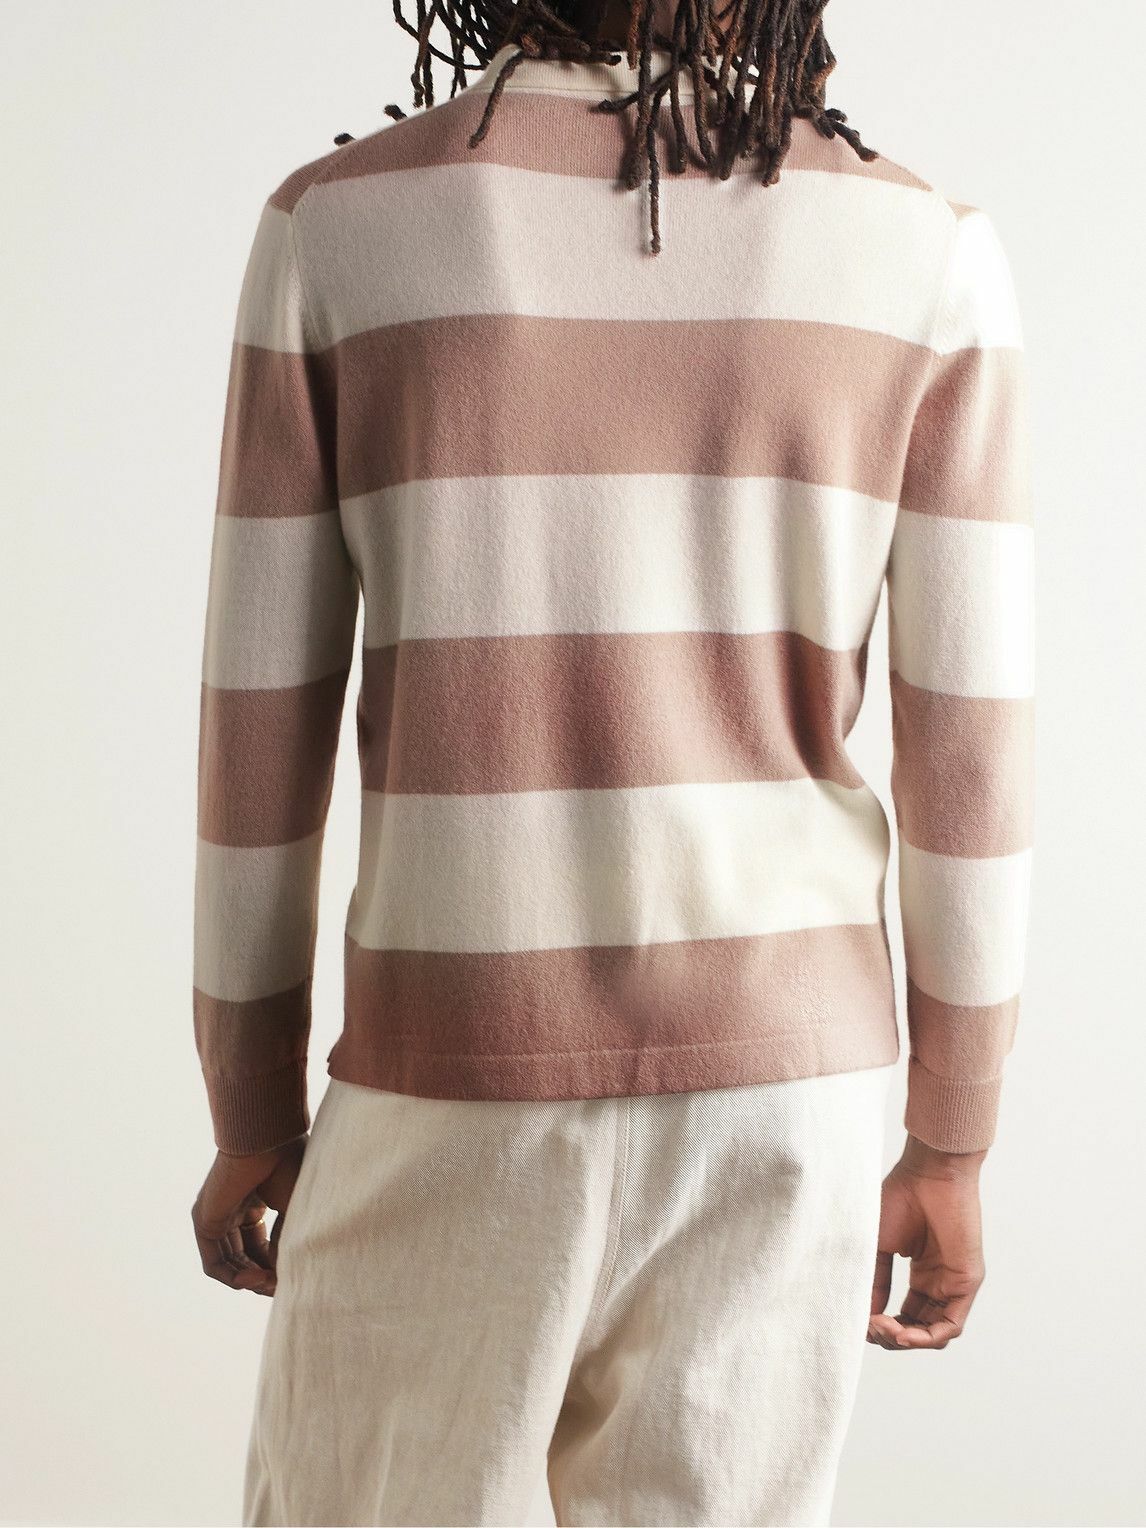 Allude - Striped Virgin Wool and Cashmere-Blend Polo Shirt - Brown